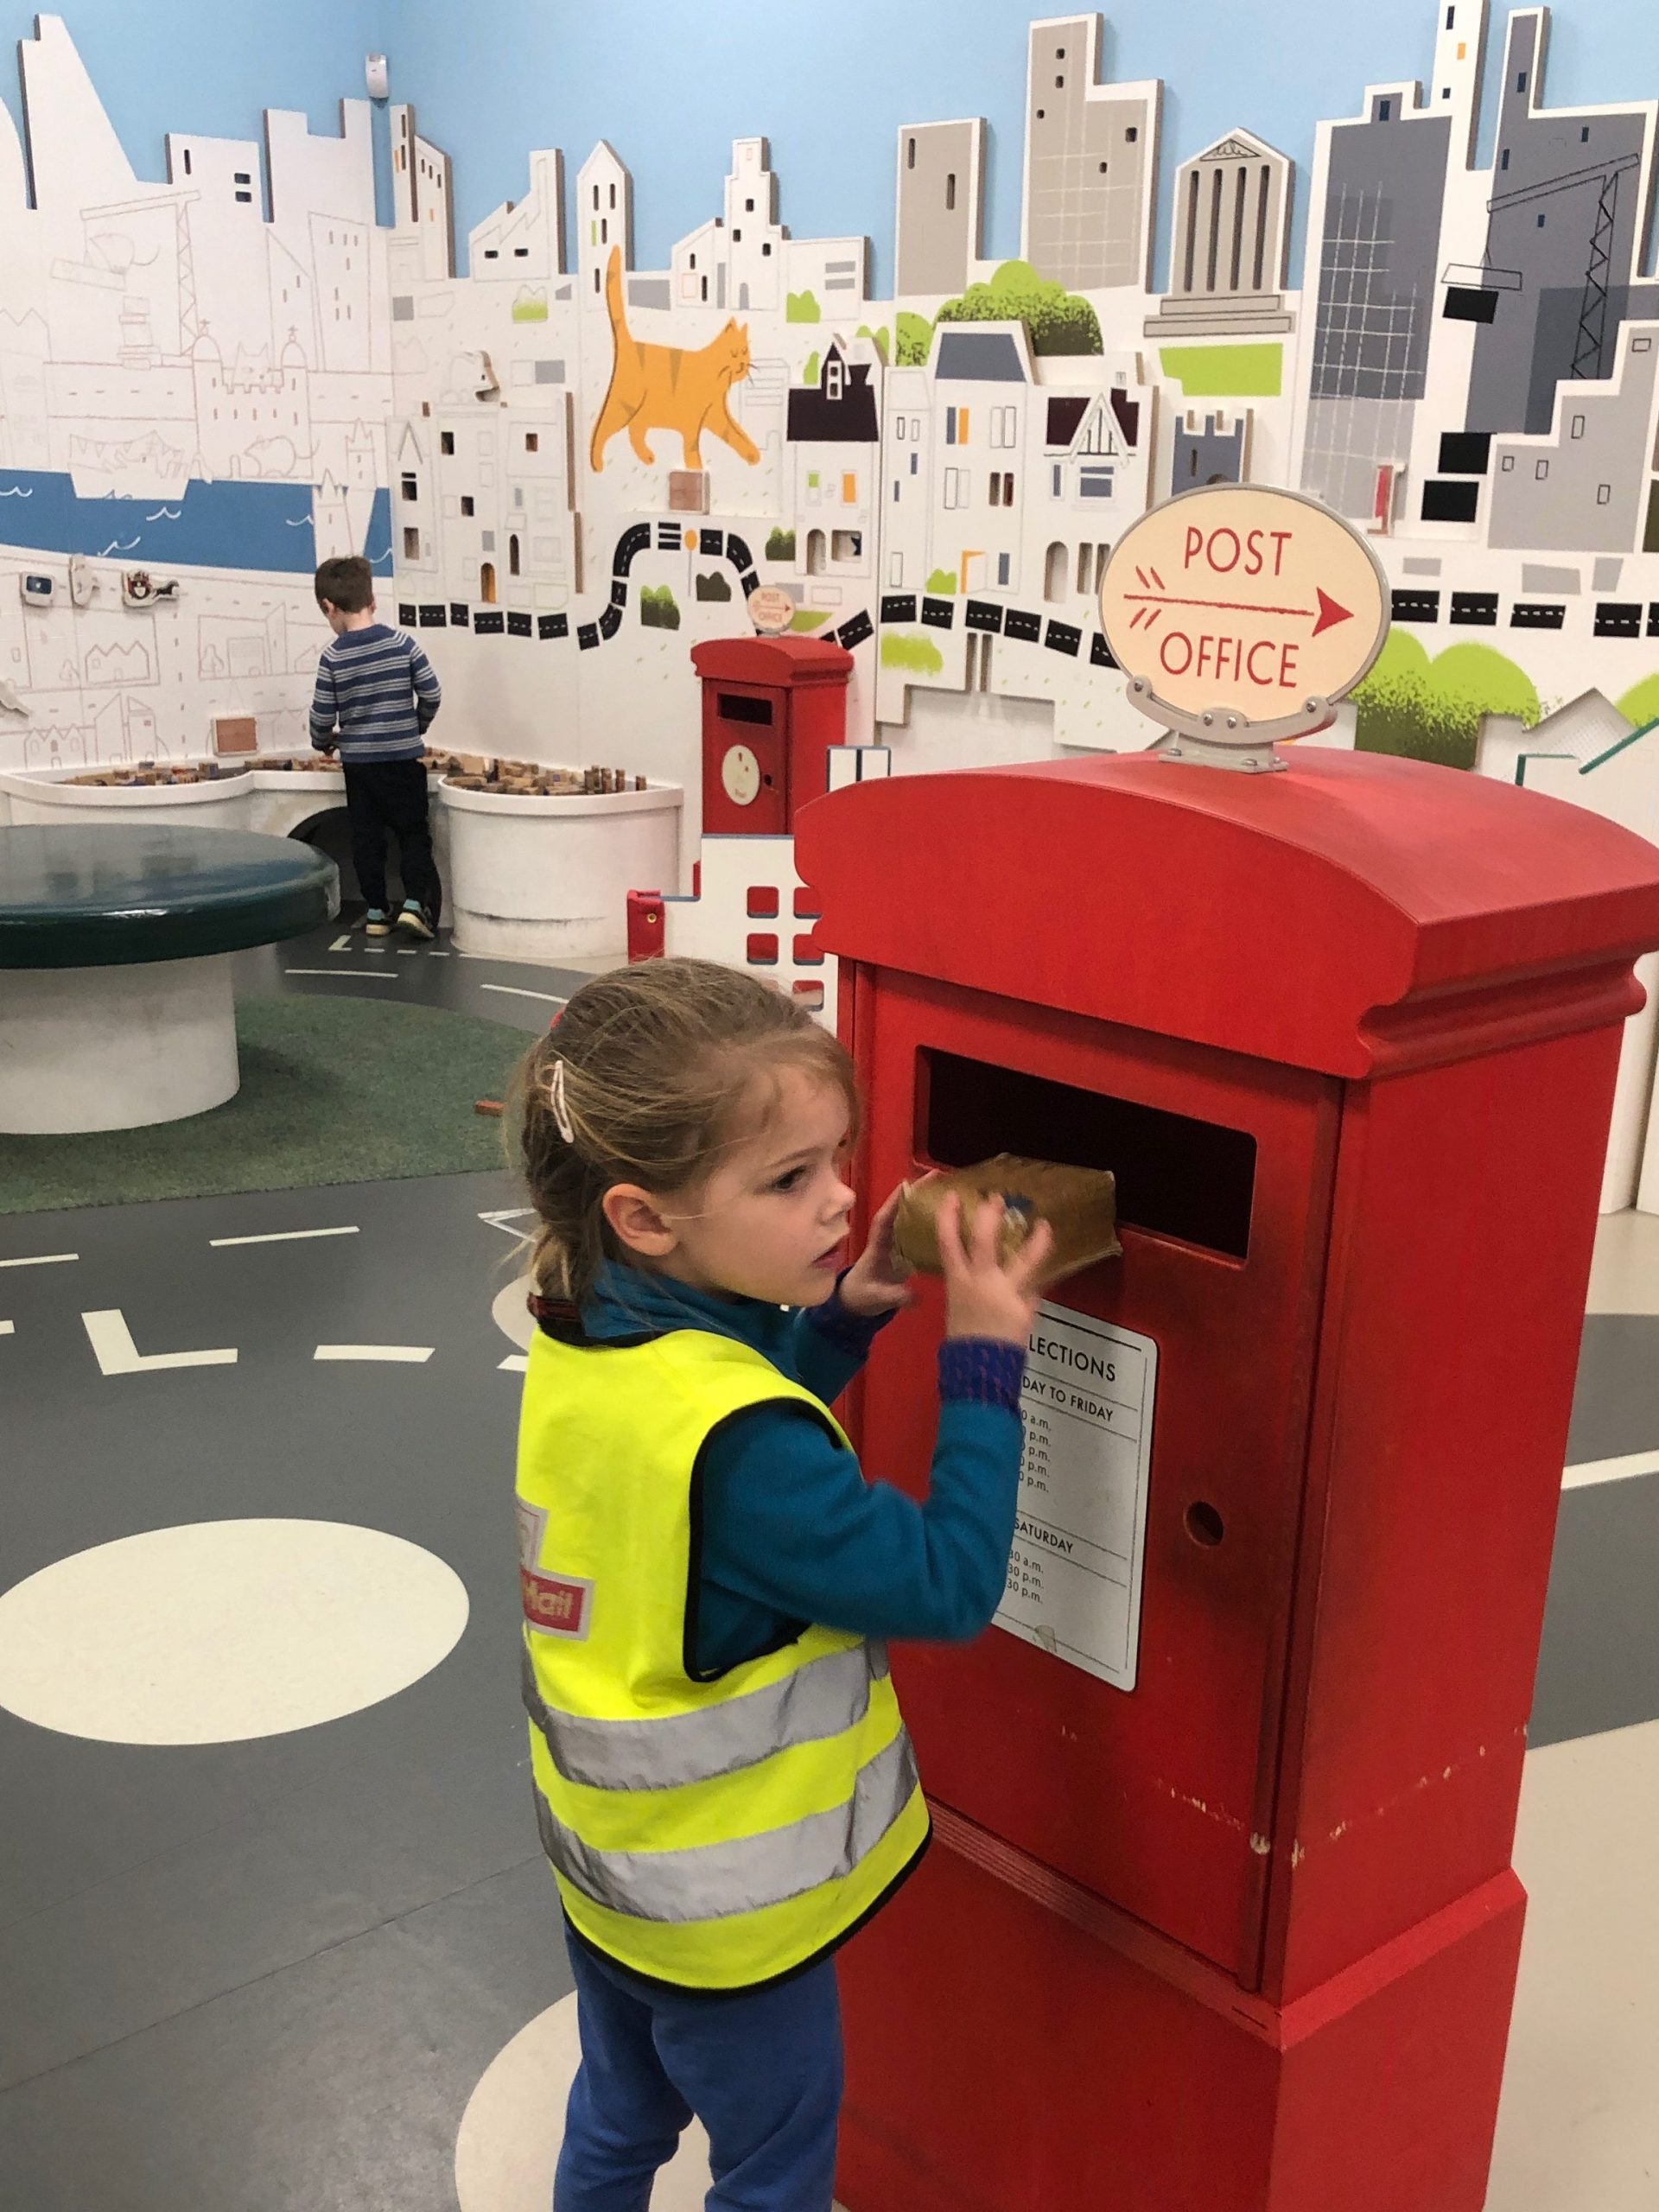 A 4 year old girl posts a parcel into a play post box at the Postal Museum's Sorted Role play area. The girl is wearing a Royal Mail high coz jacket in a child's size.